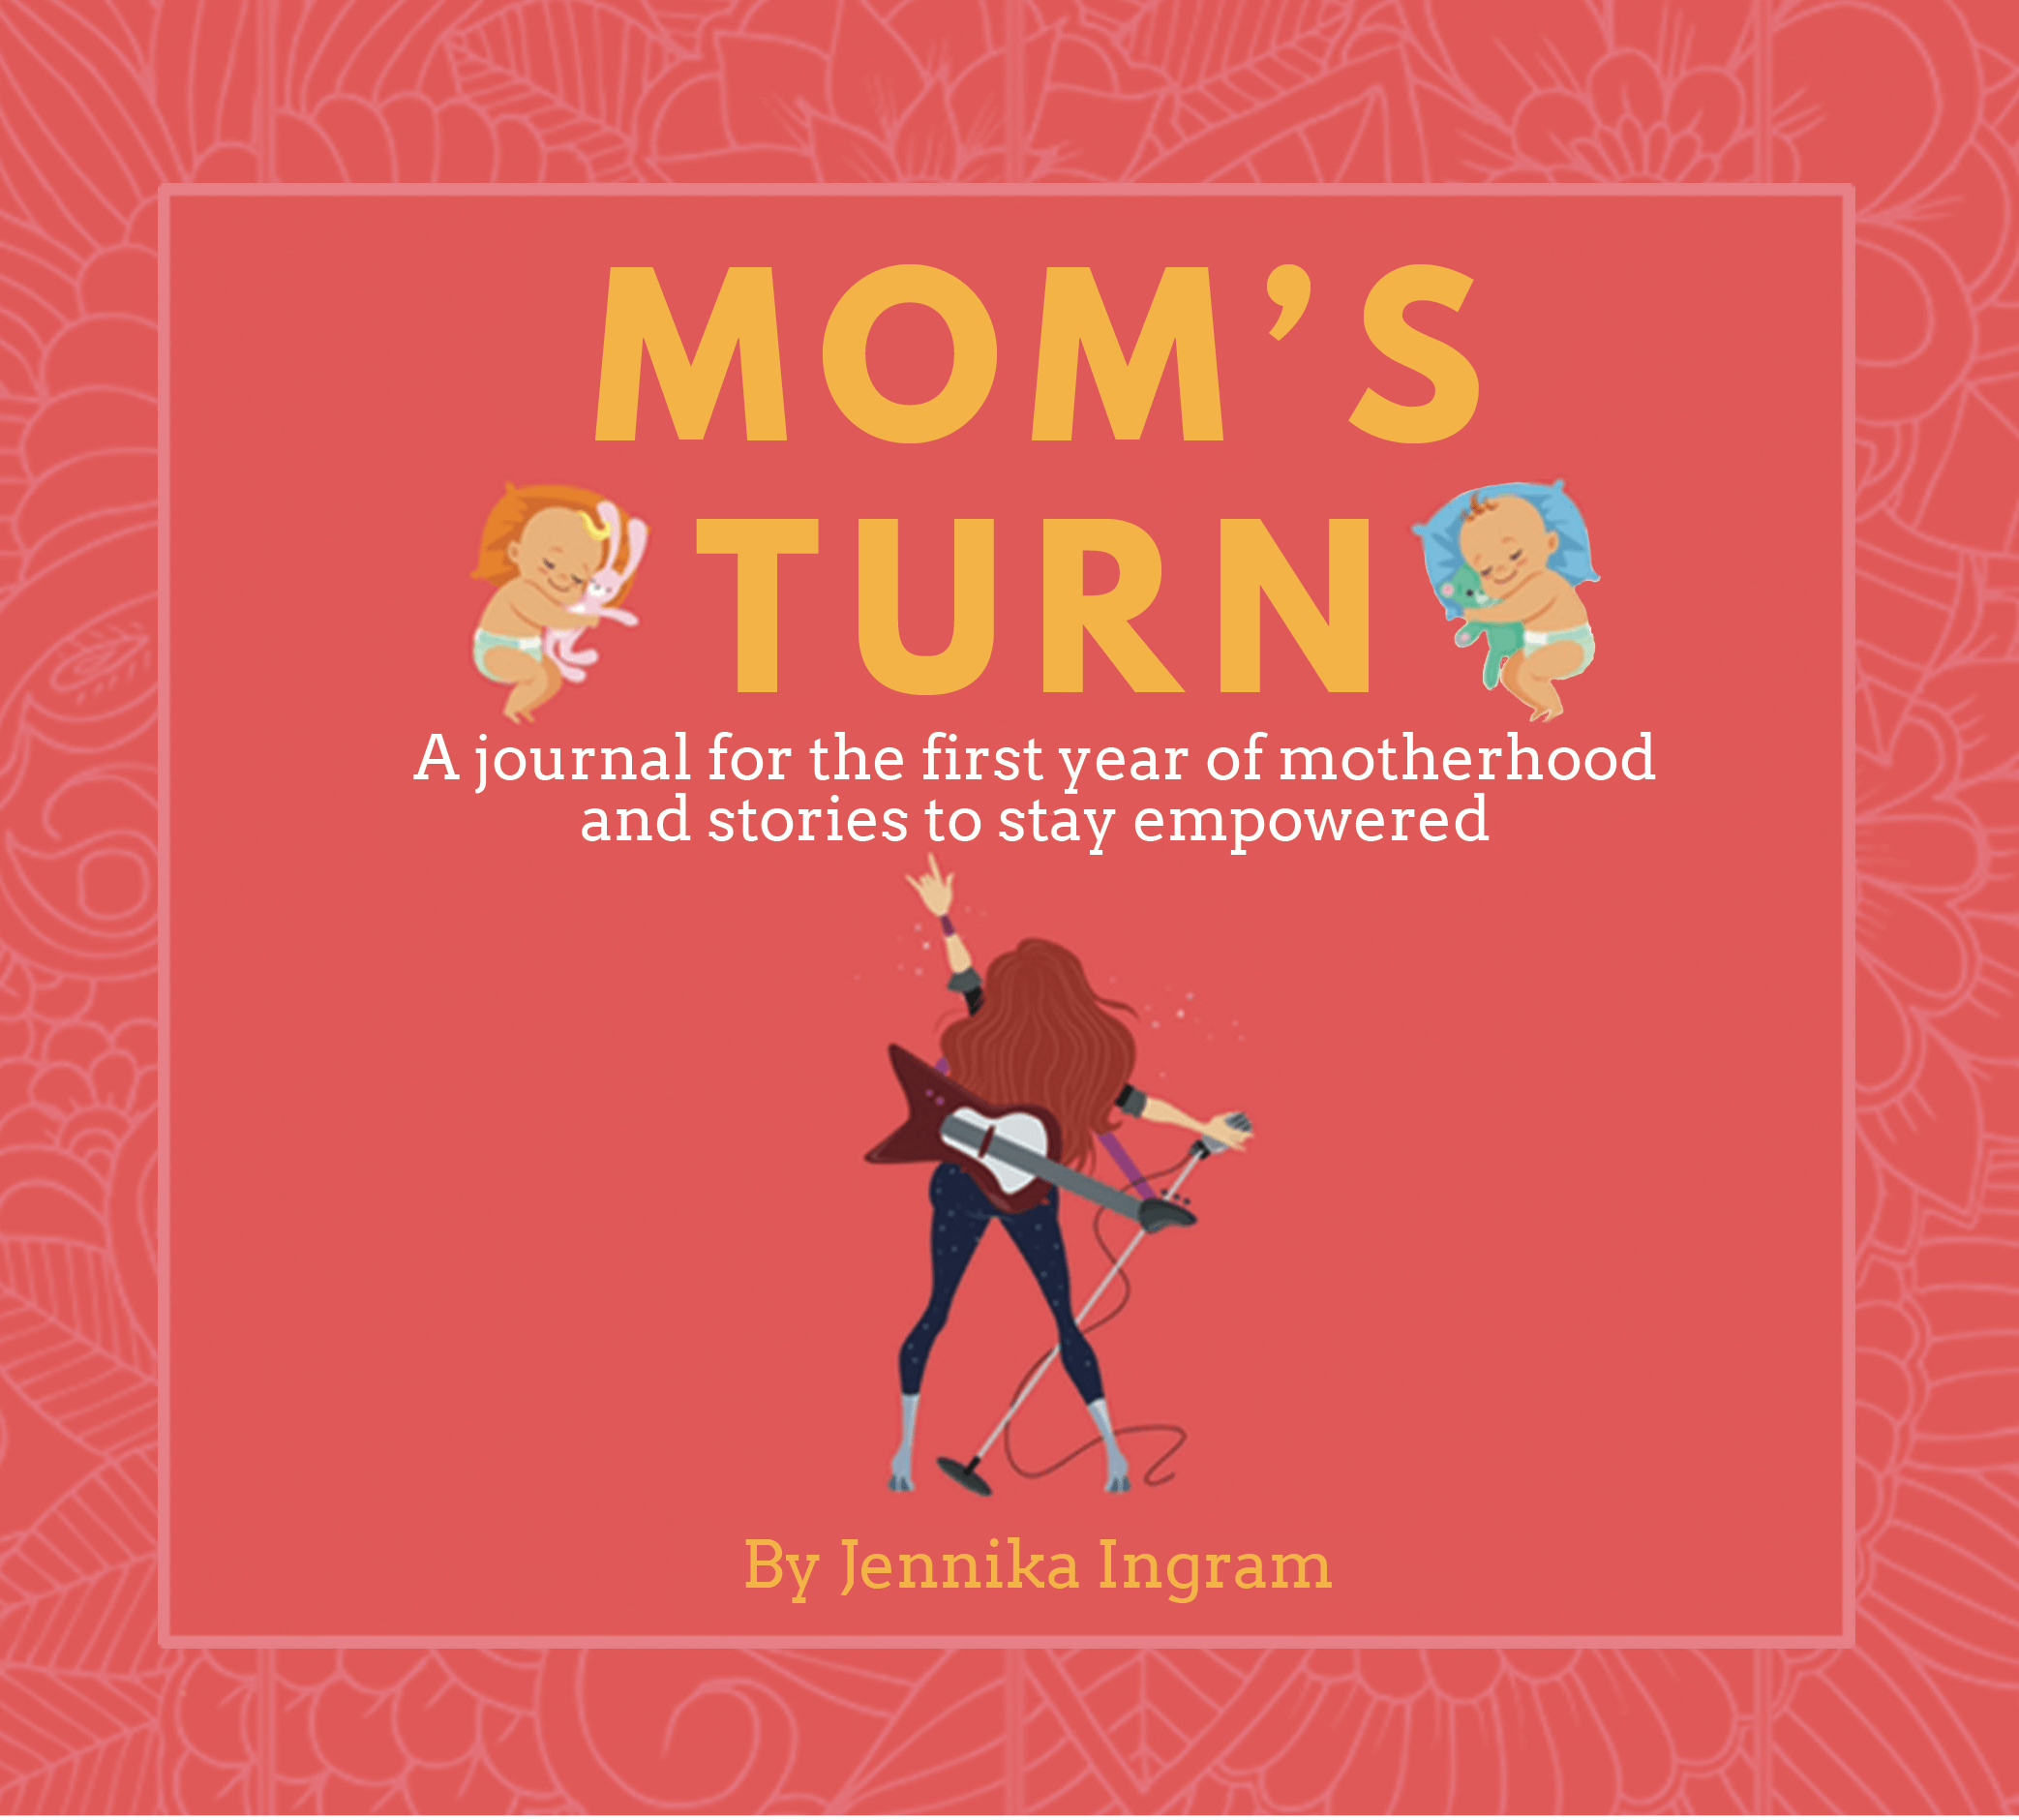 Mom's Turn: A journal for the first year of motherhood and stories to stay empowered